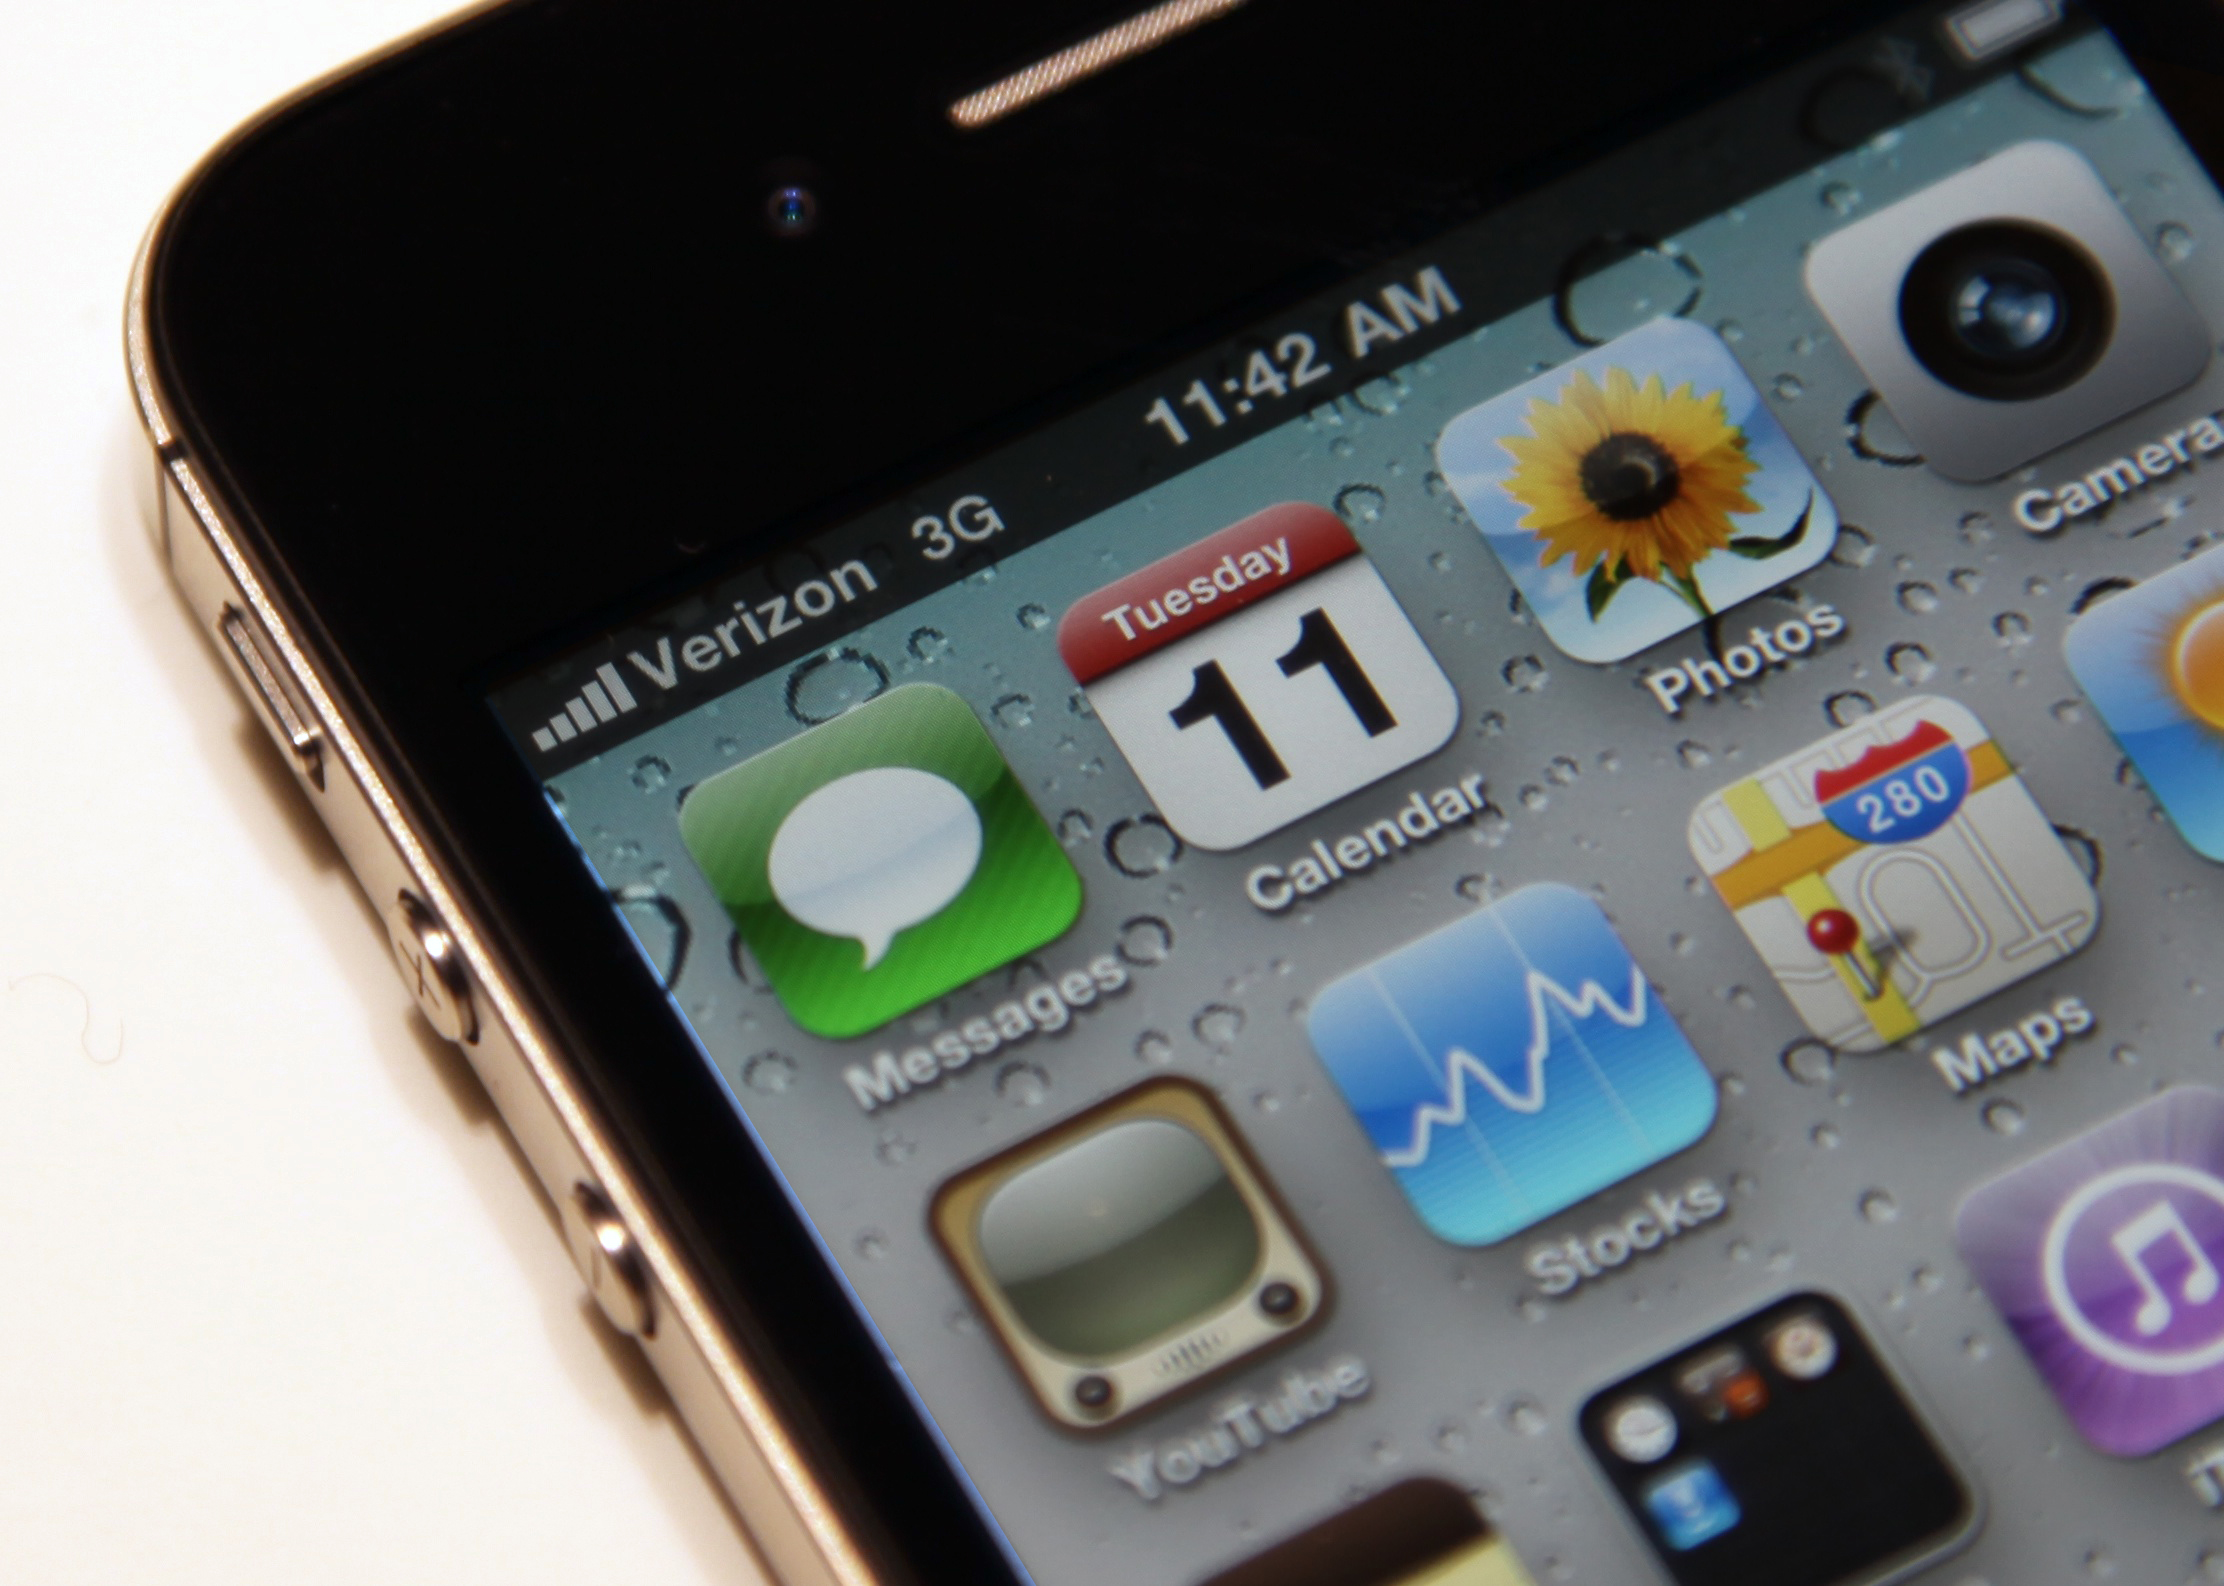 Hands On With Verizon’s iPhone 4: Same Phone, Different Network